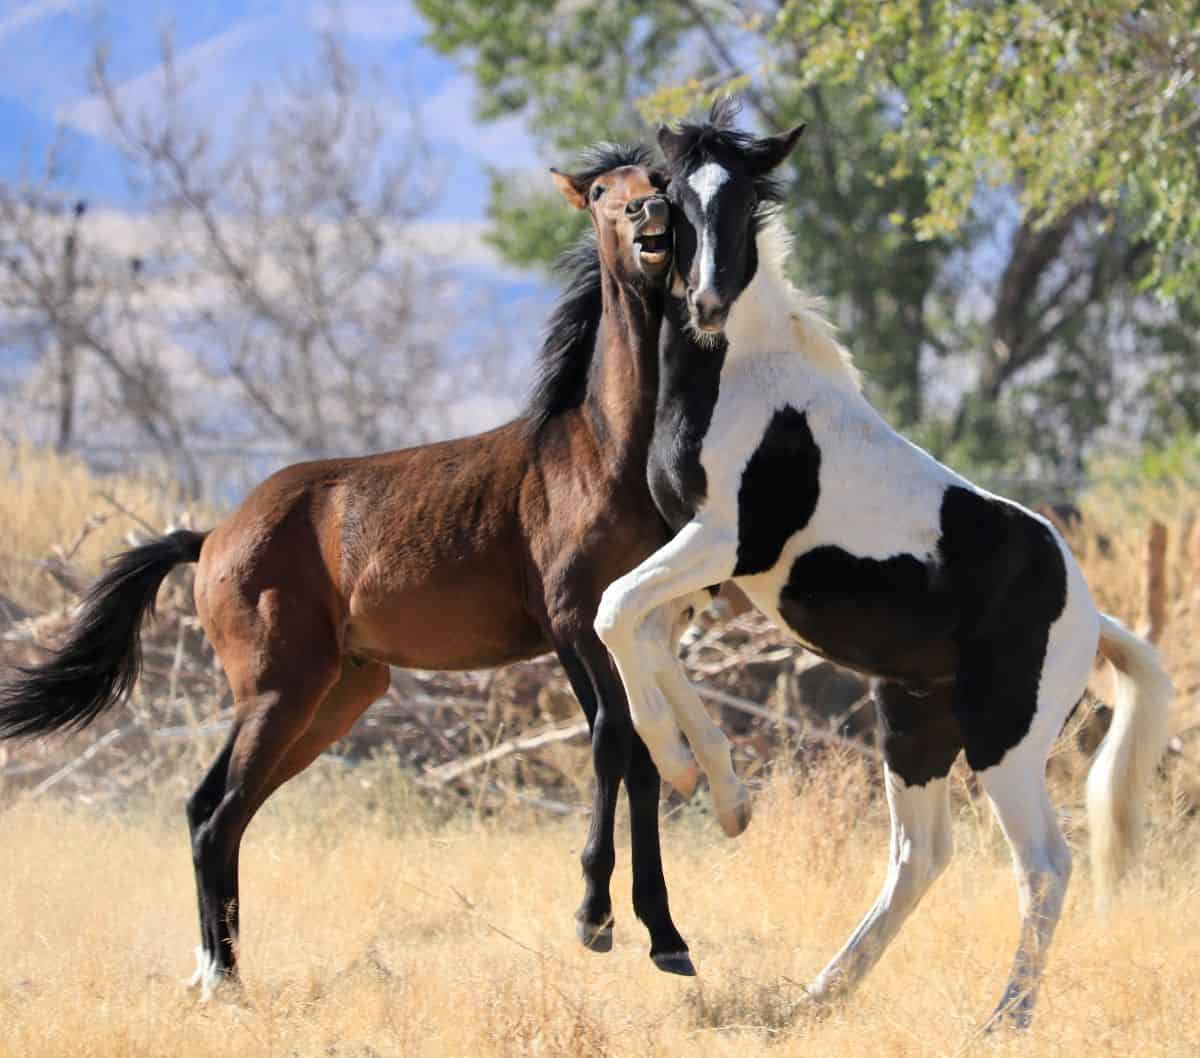 white and black horse jumping and nuzzling brown horse